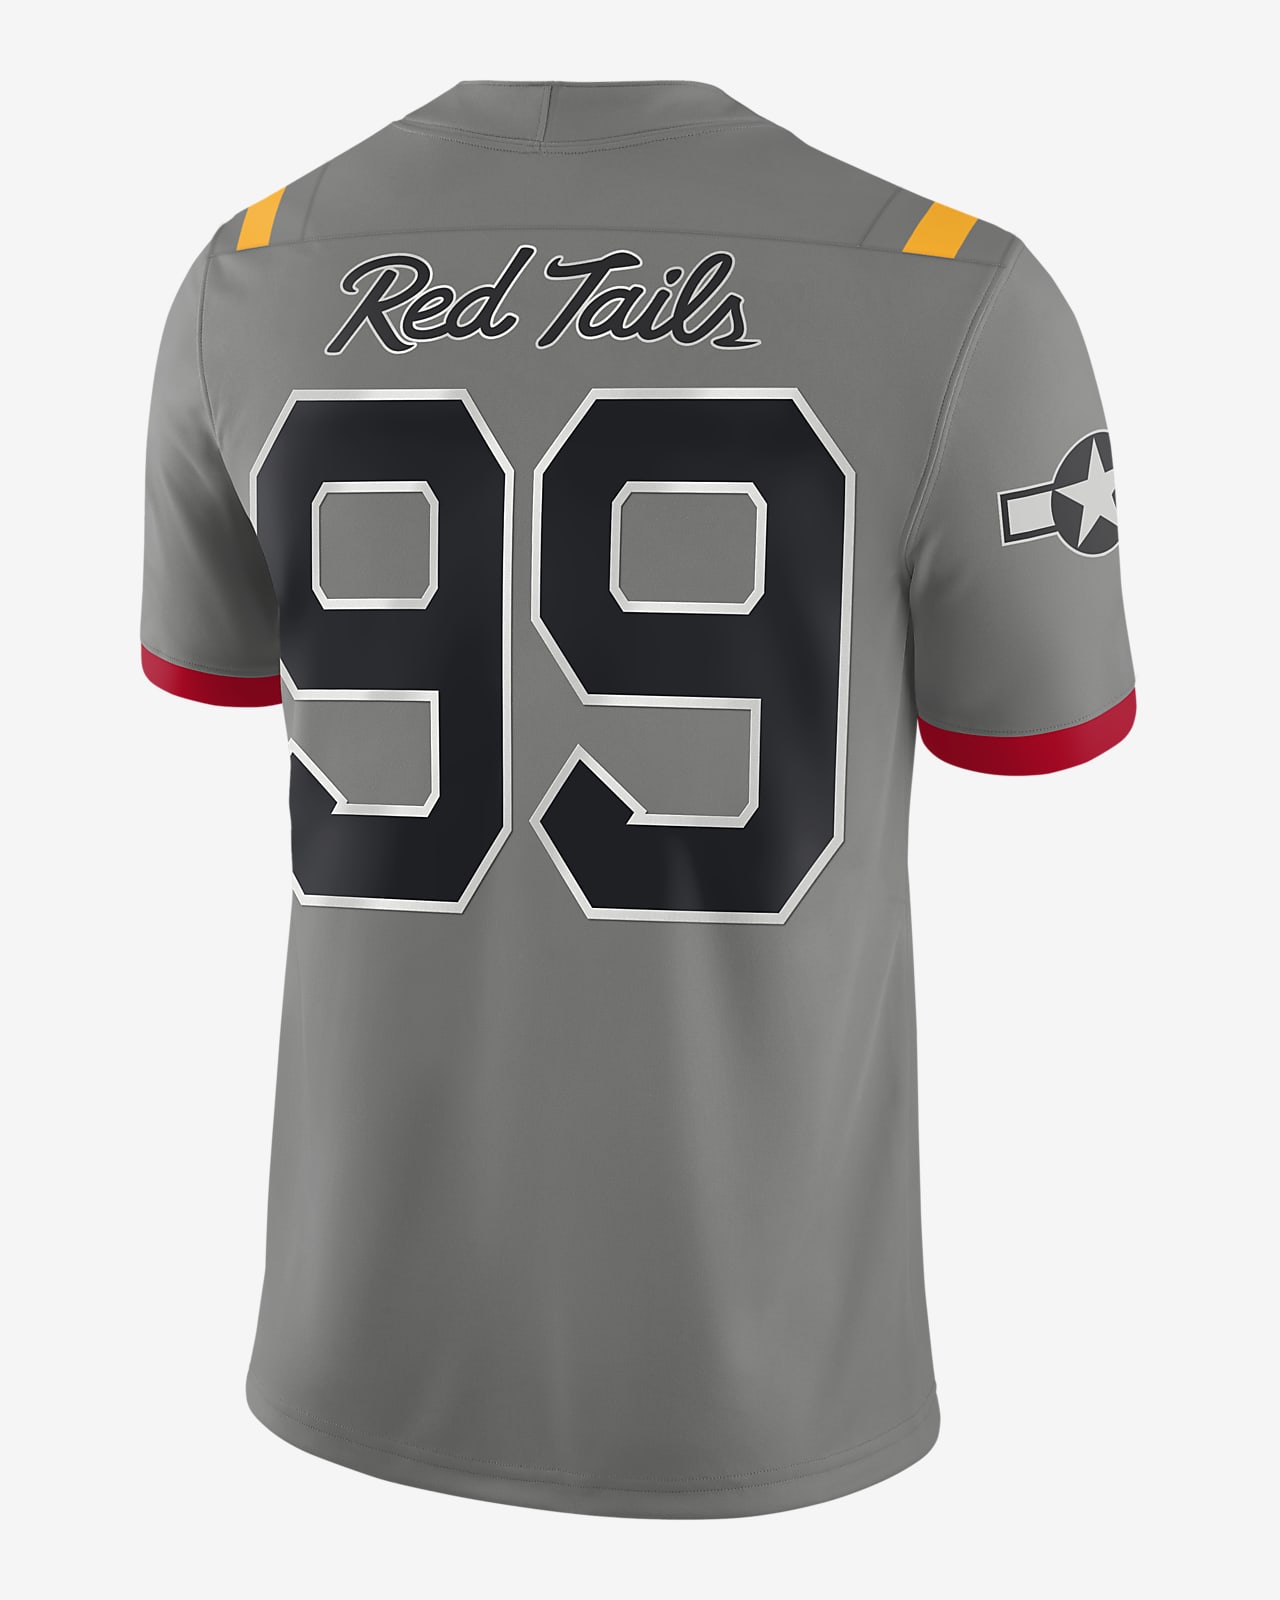 red jersey football